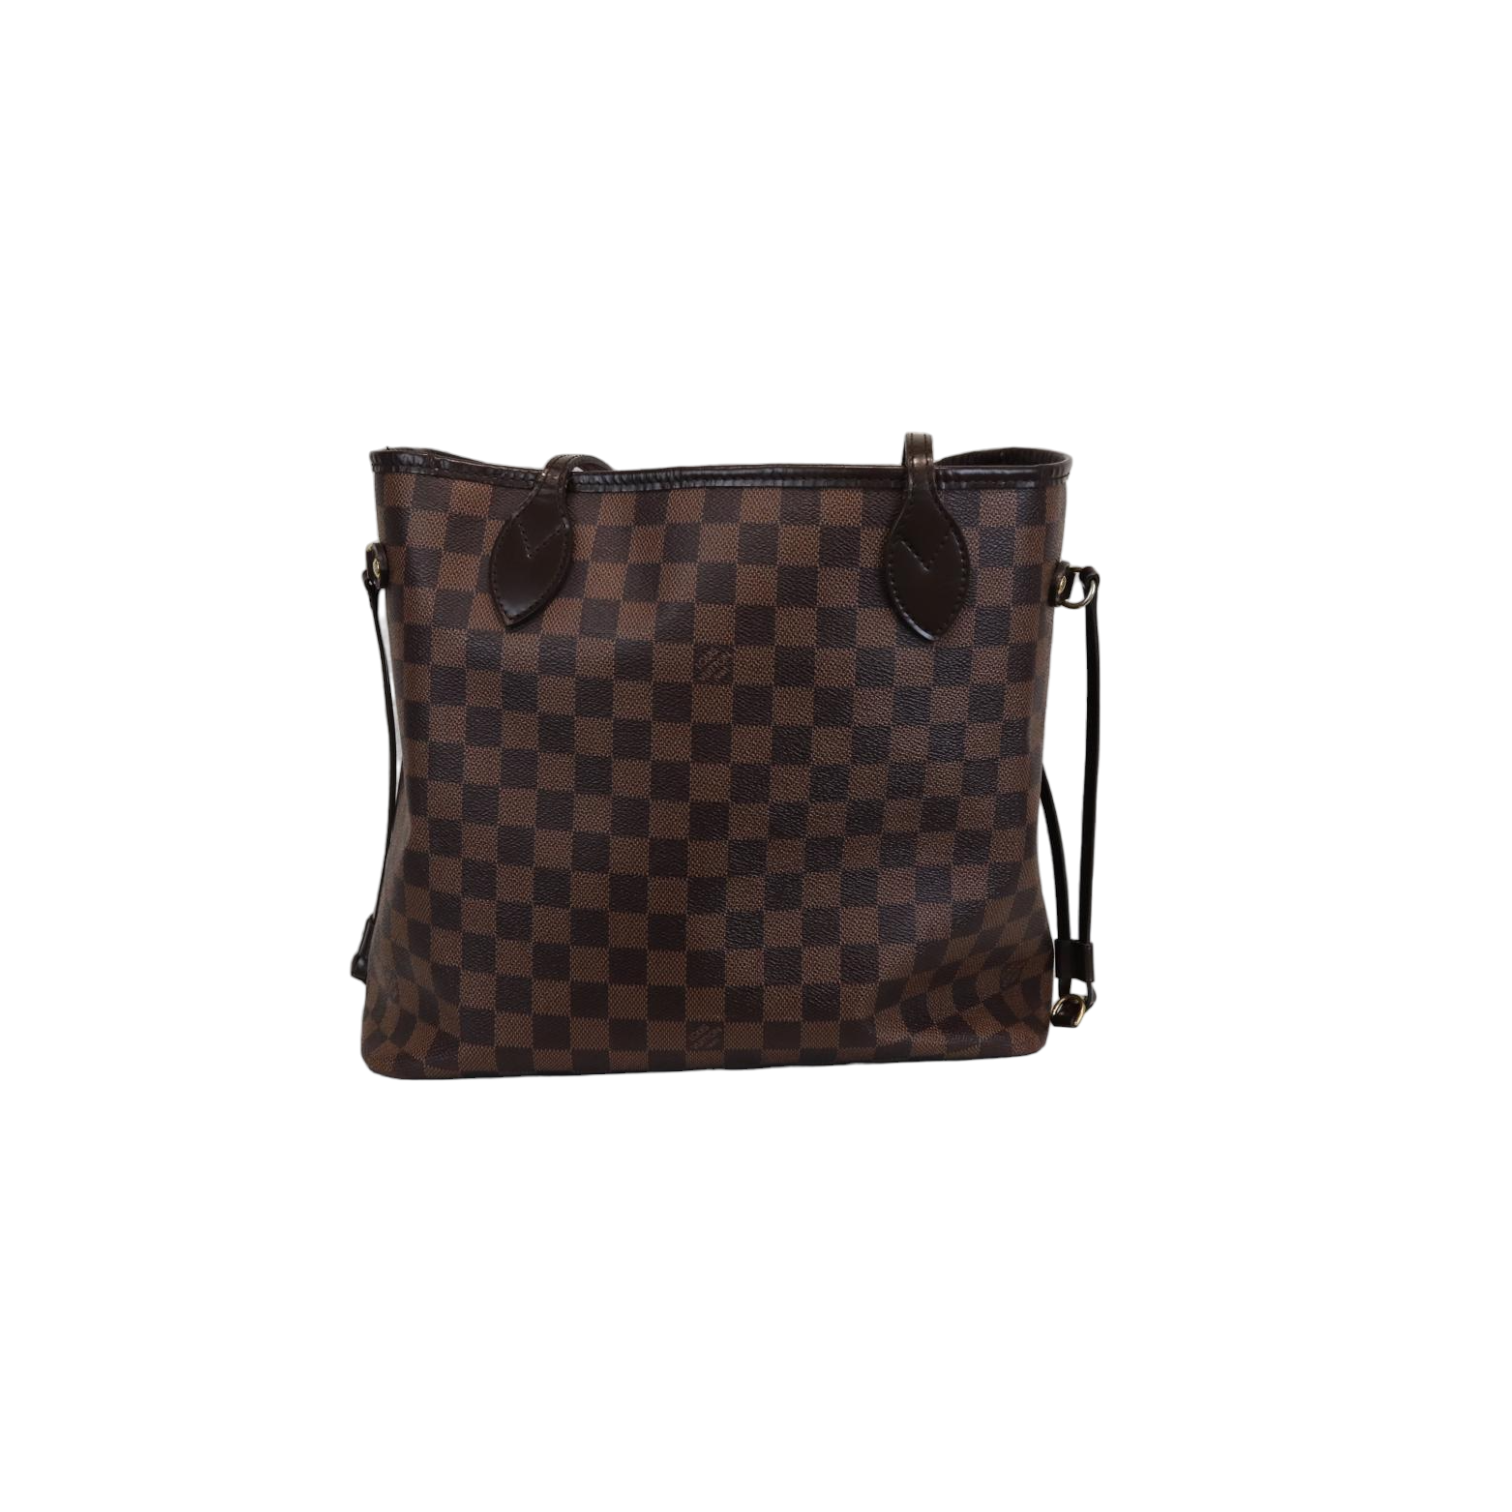 Louis Vuitton Neverfull Limited Edition Stripes Tote bag in brown canvas,  GHW